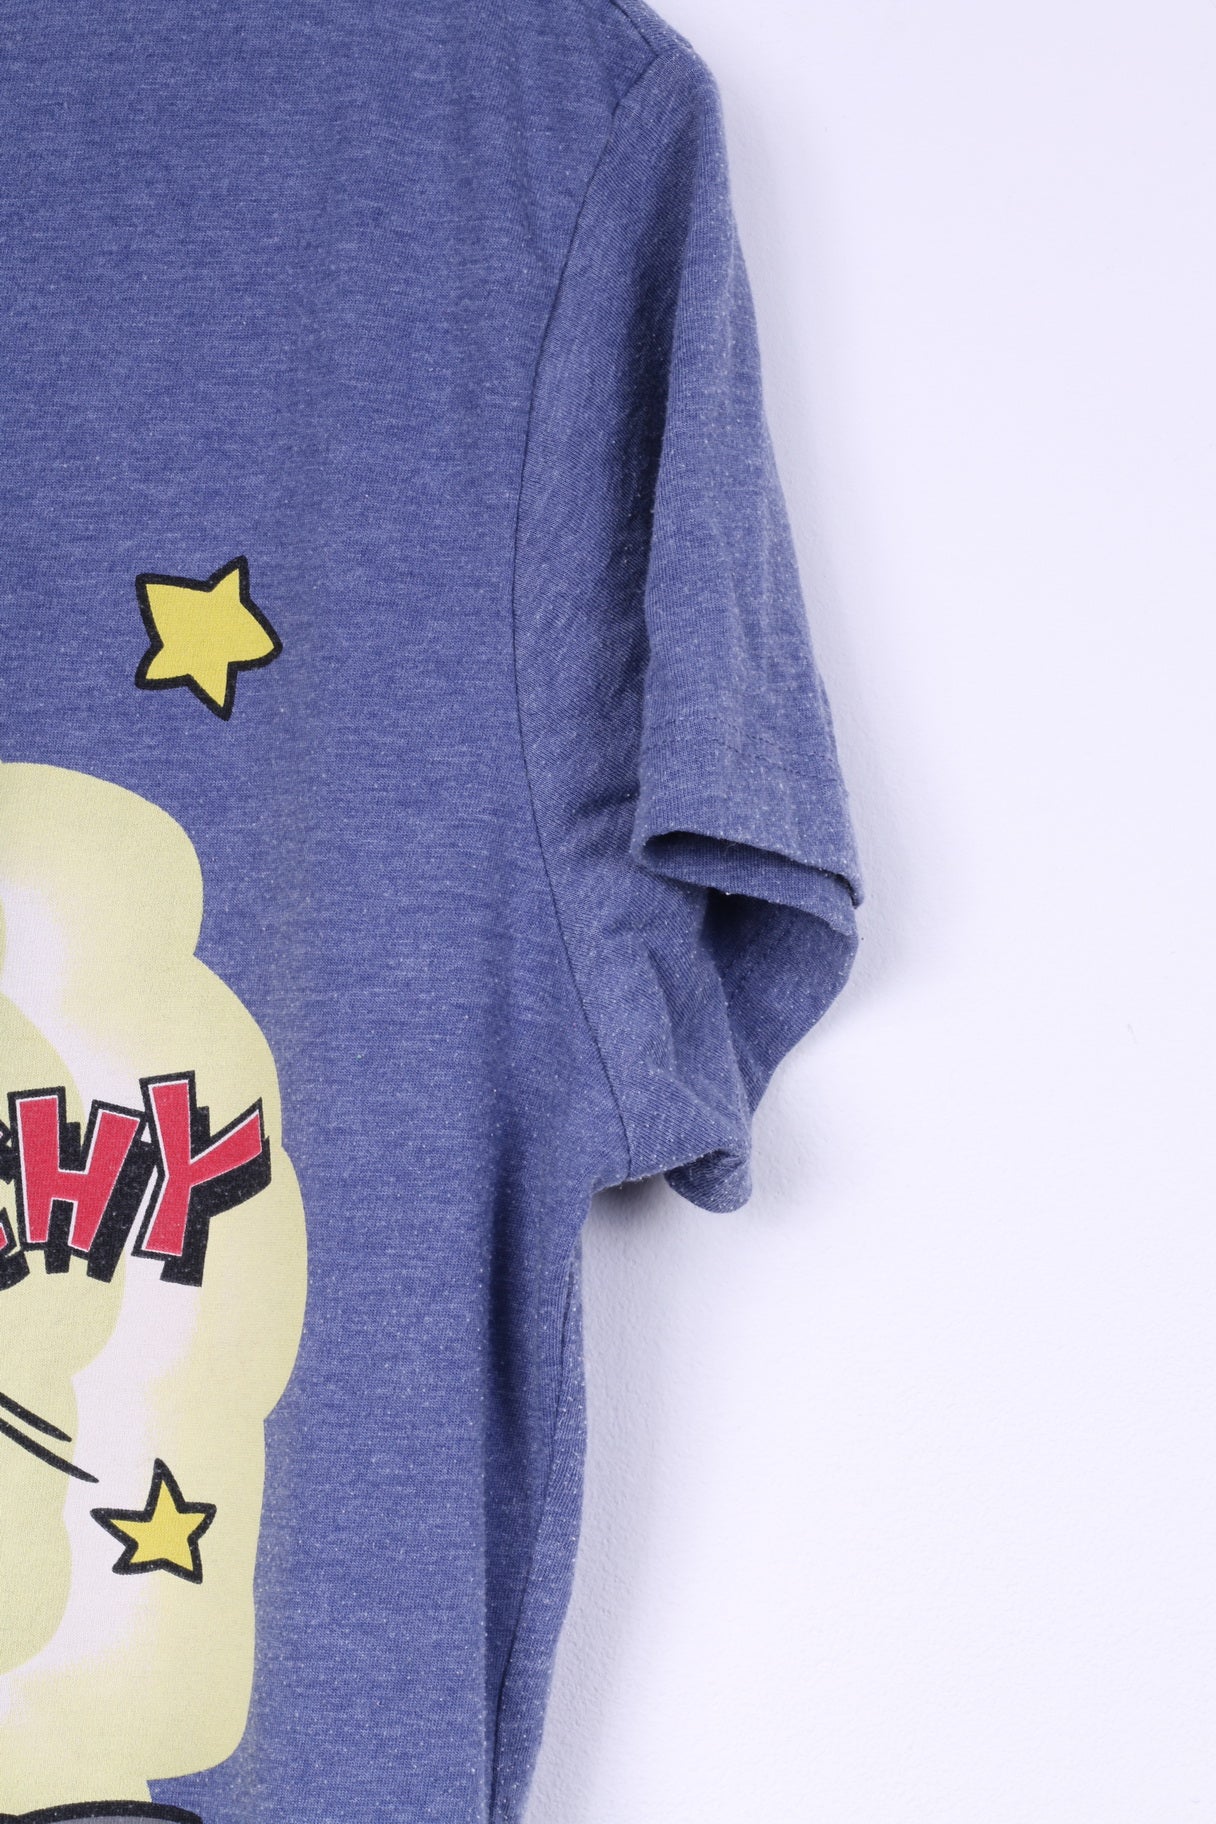 T-shirt da uomo C&amp;A The Simpsons Blu in misto cotone con grafica The Itchy &amp; Scratchy Show 